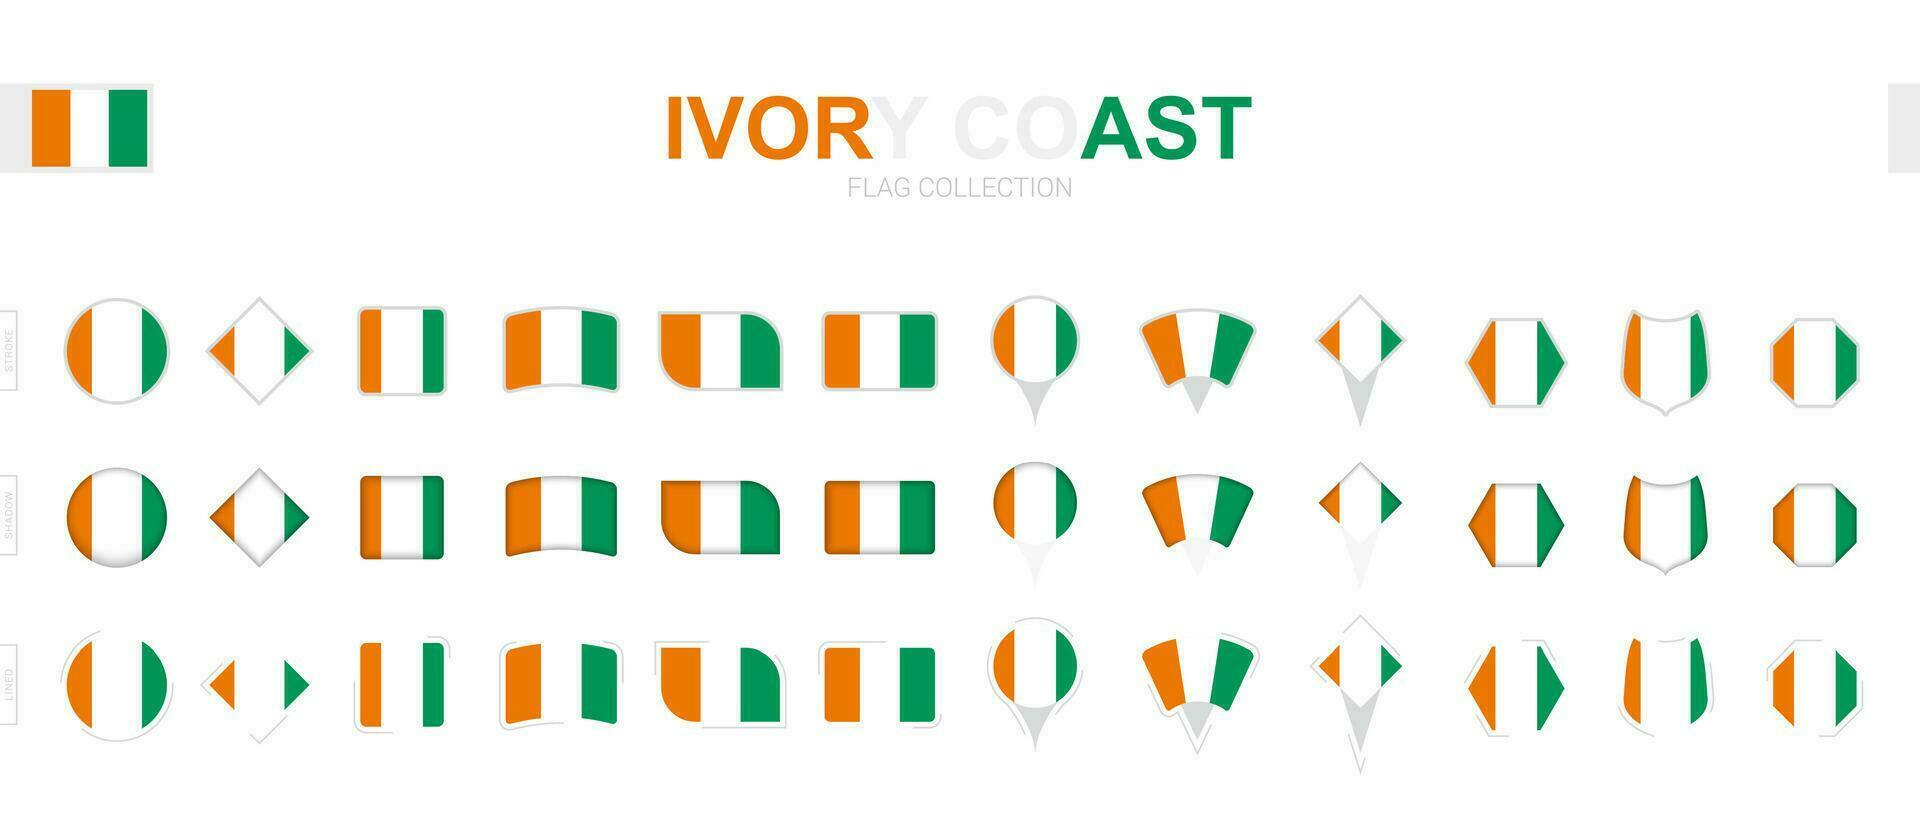 Large collection of Ivory Coast flags of various shapes and effects. vector